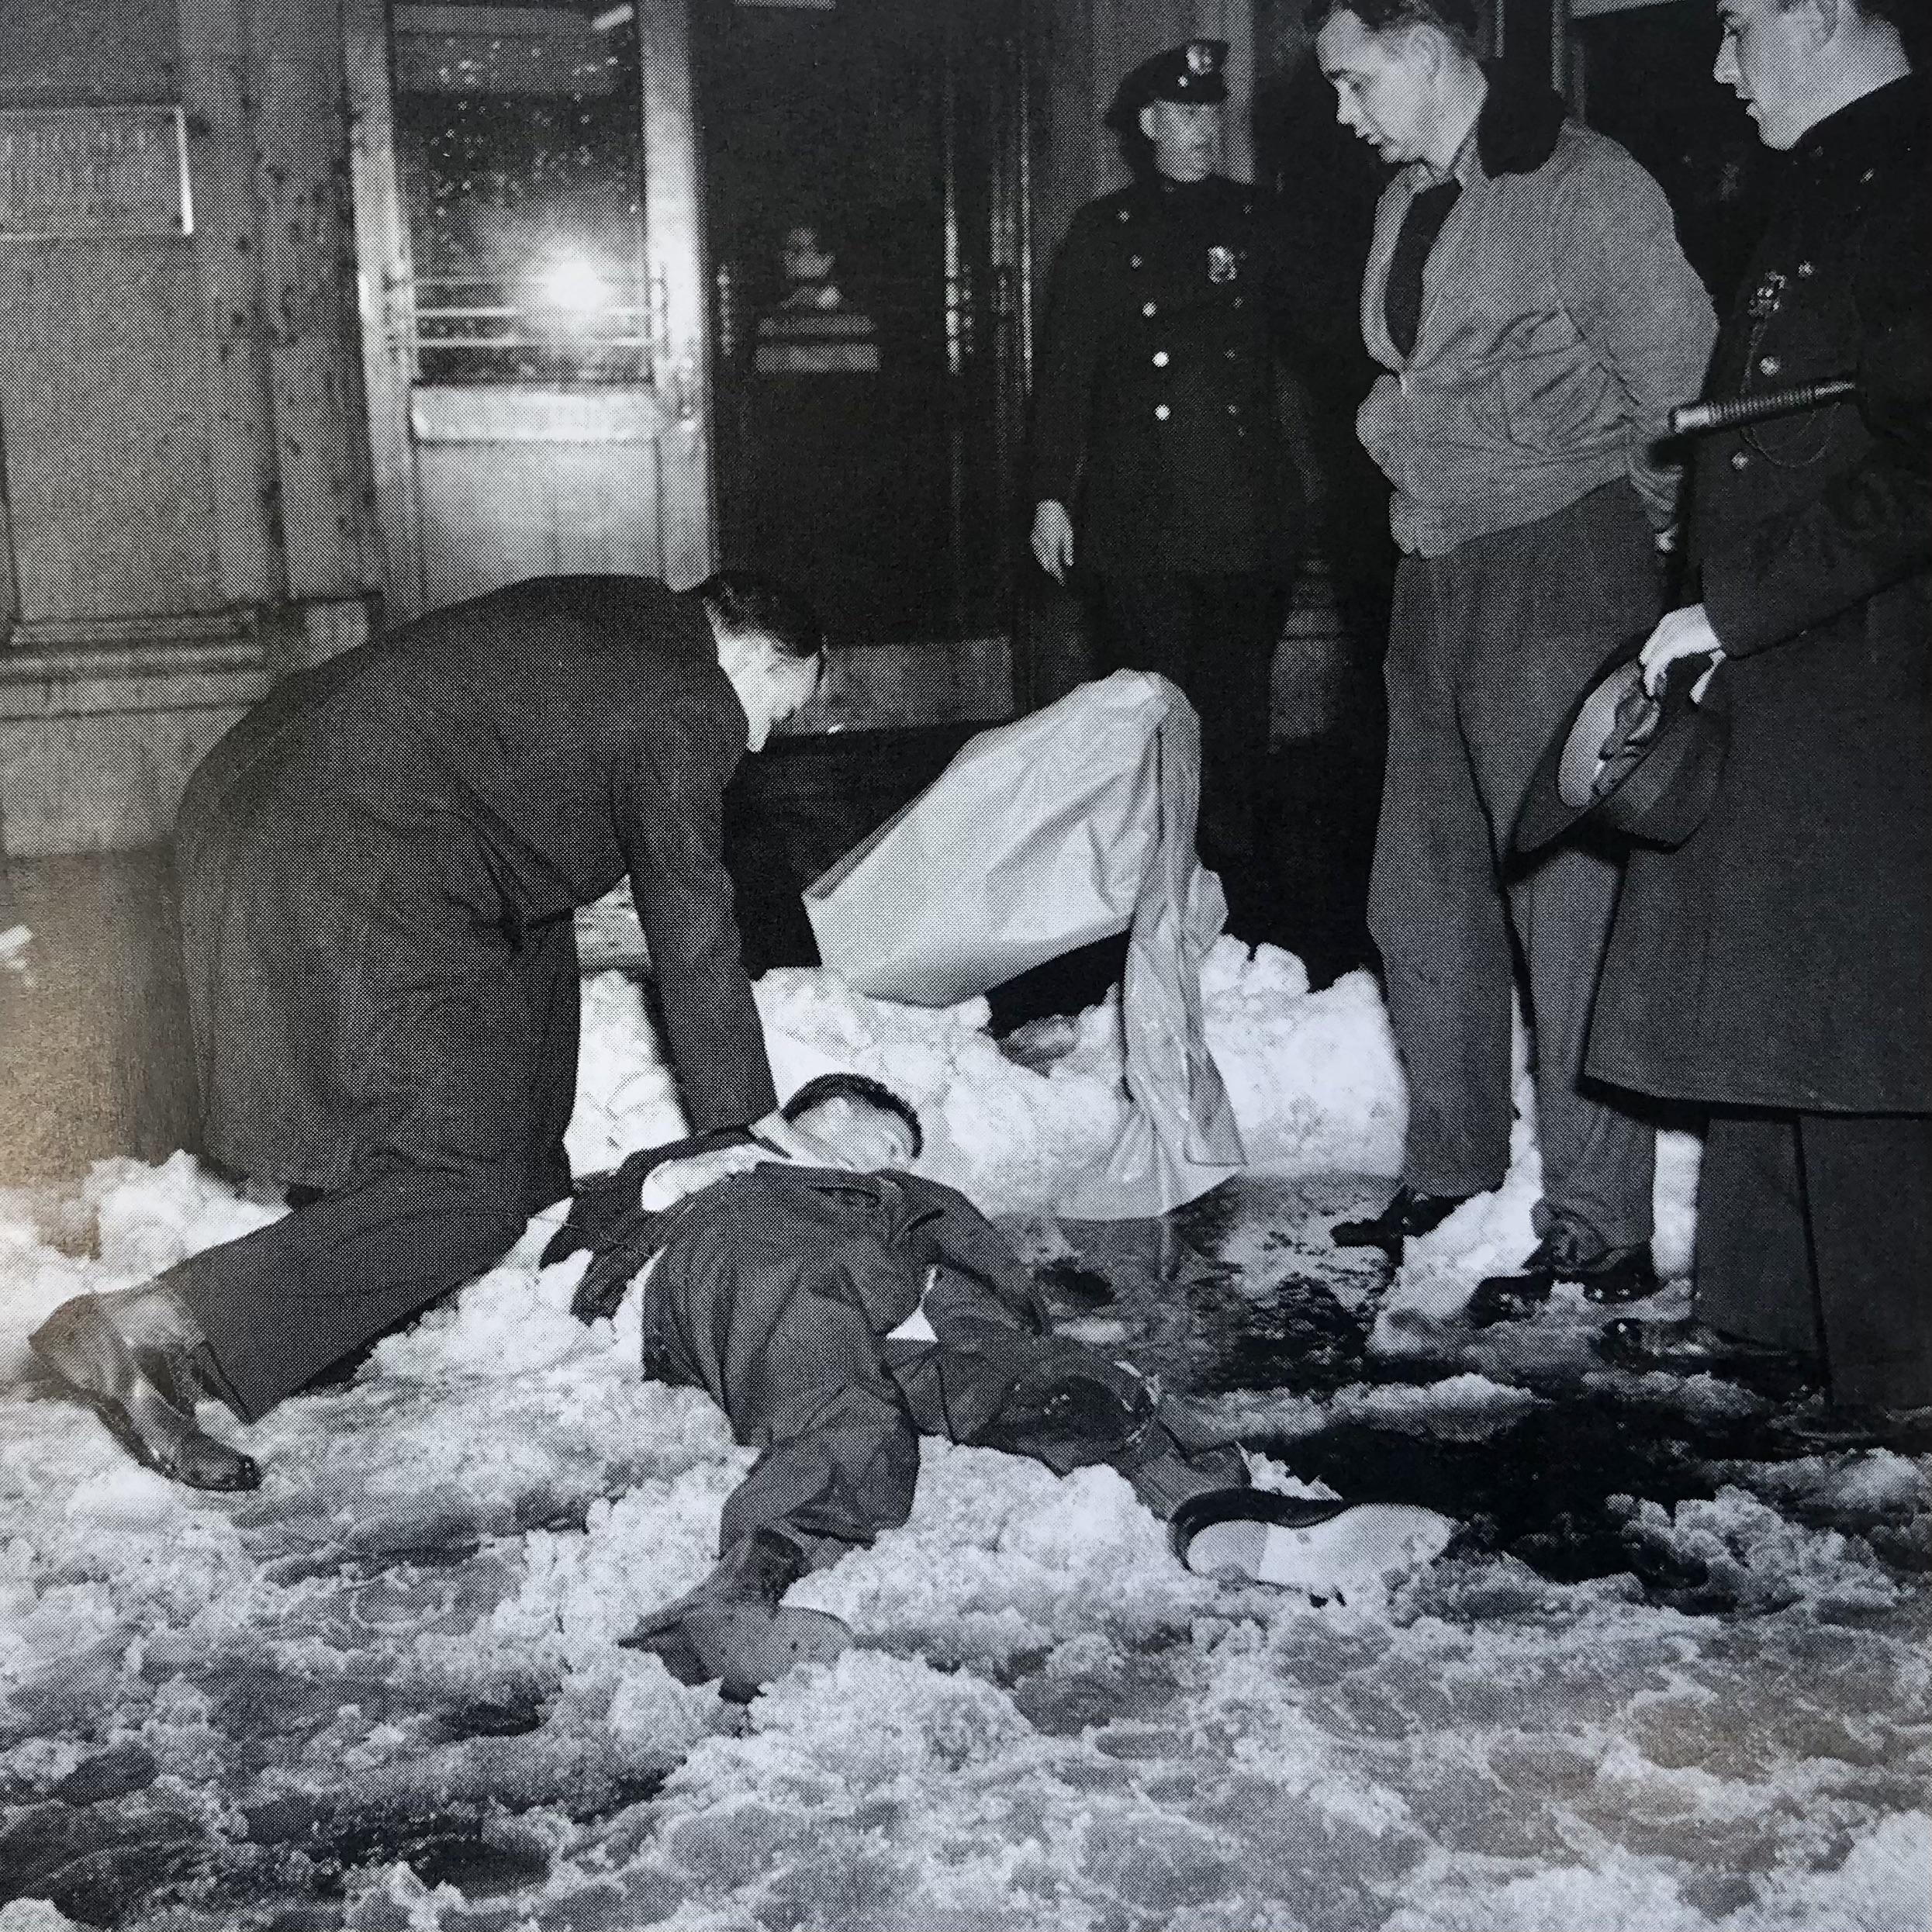 A priest administers last rites to Laurence Duggan, WWII State Dept Head, Soviet spy, after he jumped from the window of his Manhattan office in December 1948.